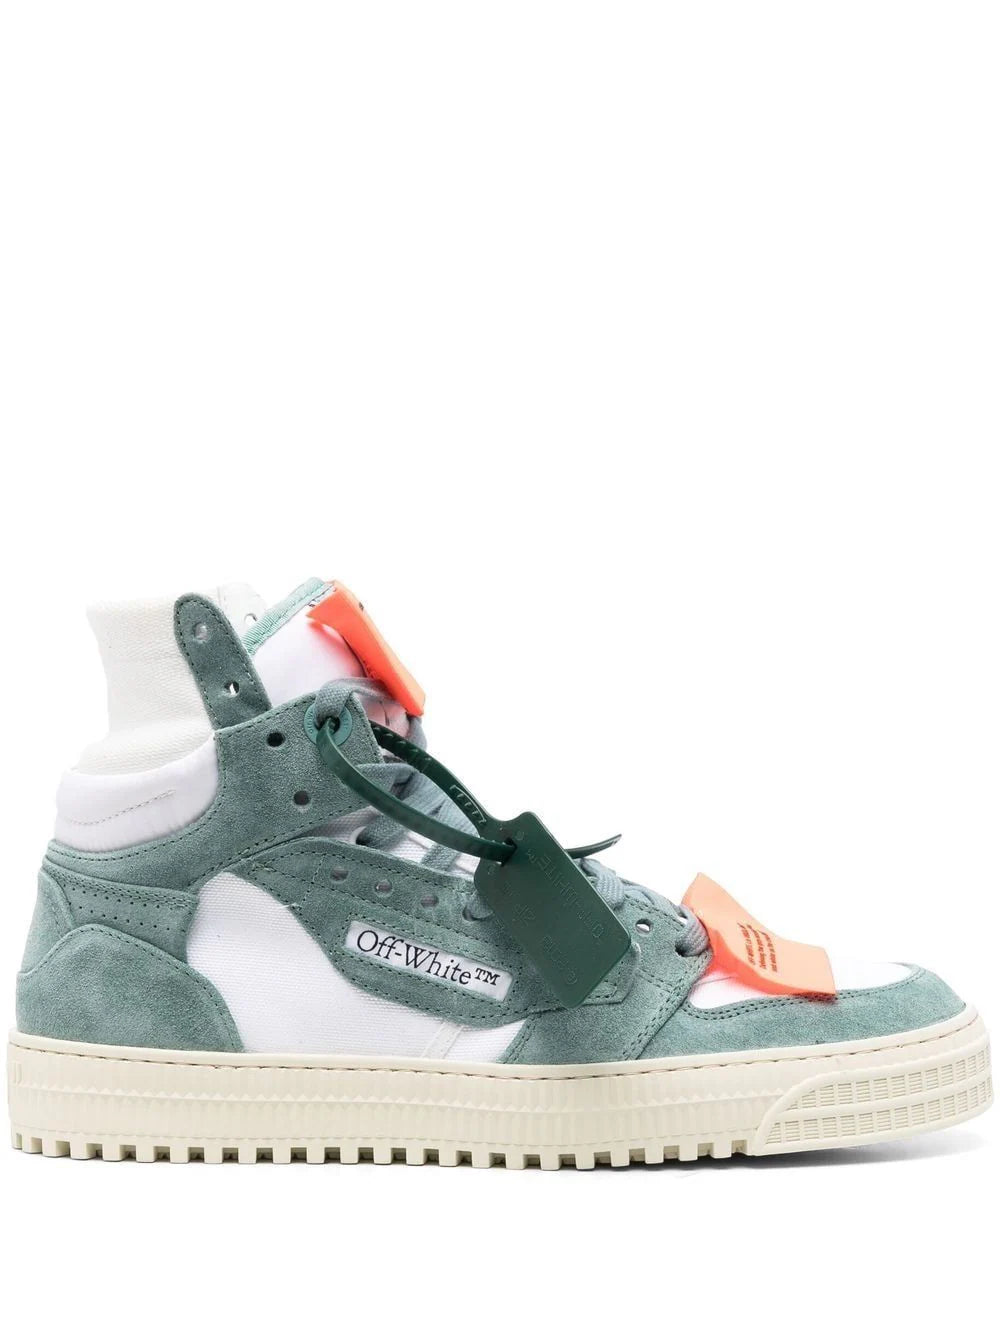 Off-White 3.0 Off-Court sneakers (Preowned)